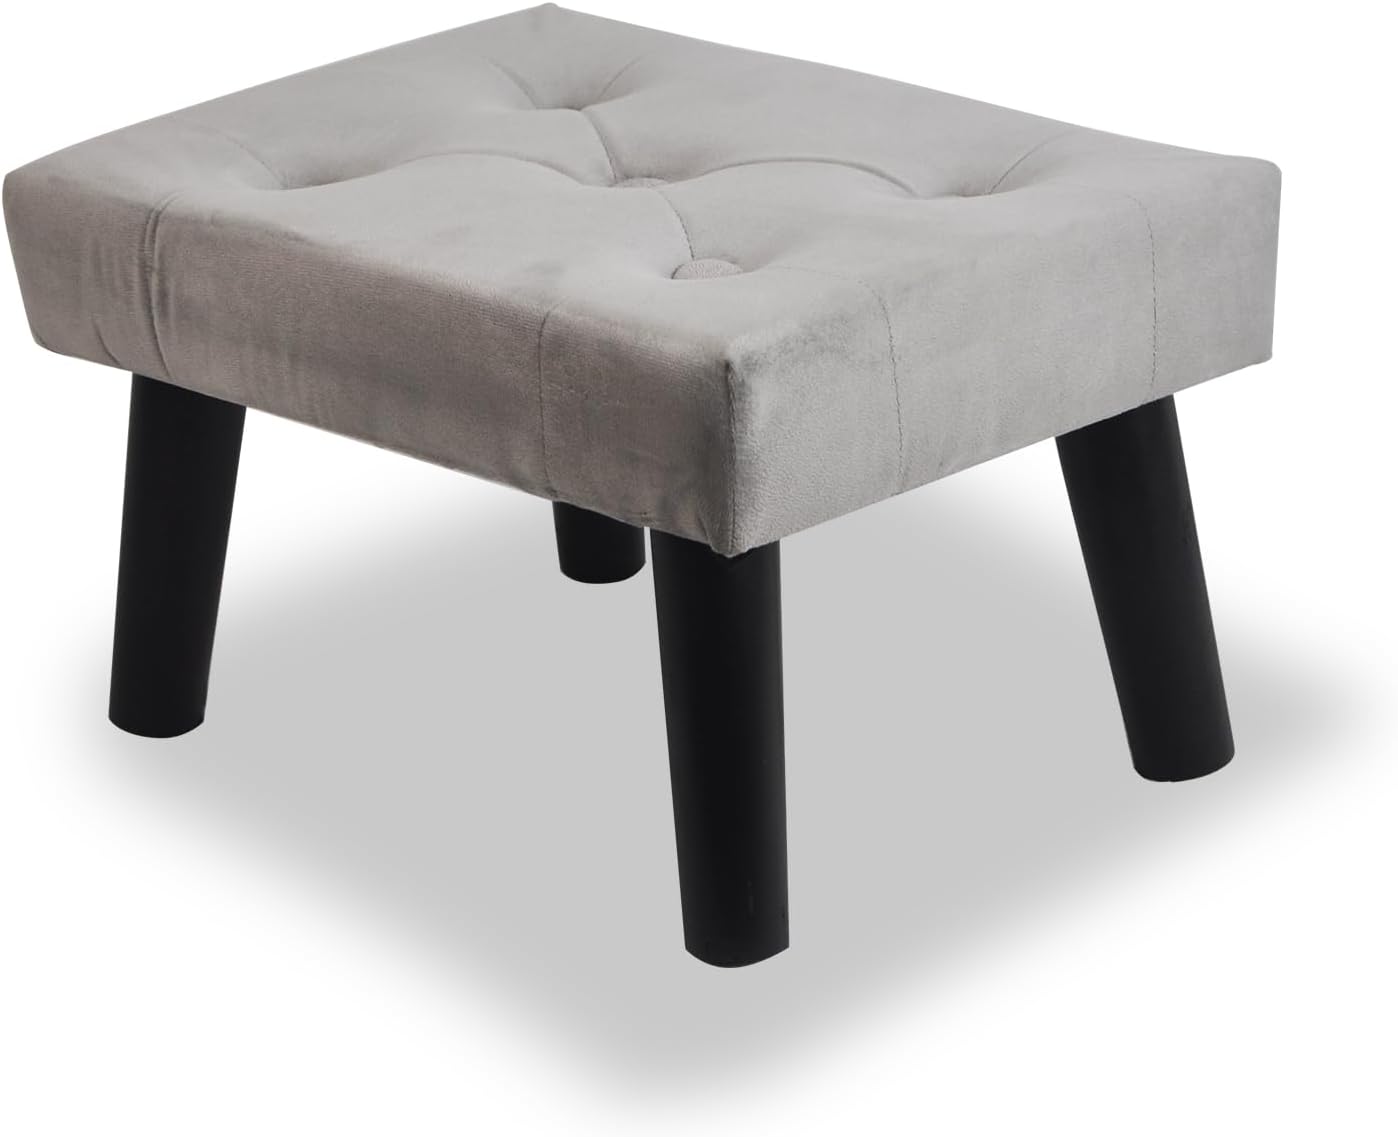 Small Footstool Ottoman, Velvet Footrest Stool with Wood Leg Sofa Footrest Extra Seating Rectangle Foot Stools for Couch Living Room Bedroom Entryway Office -Grey